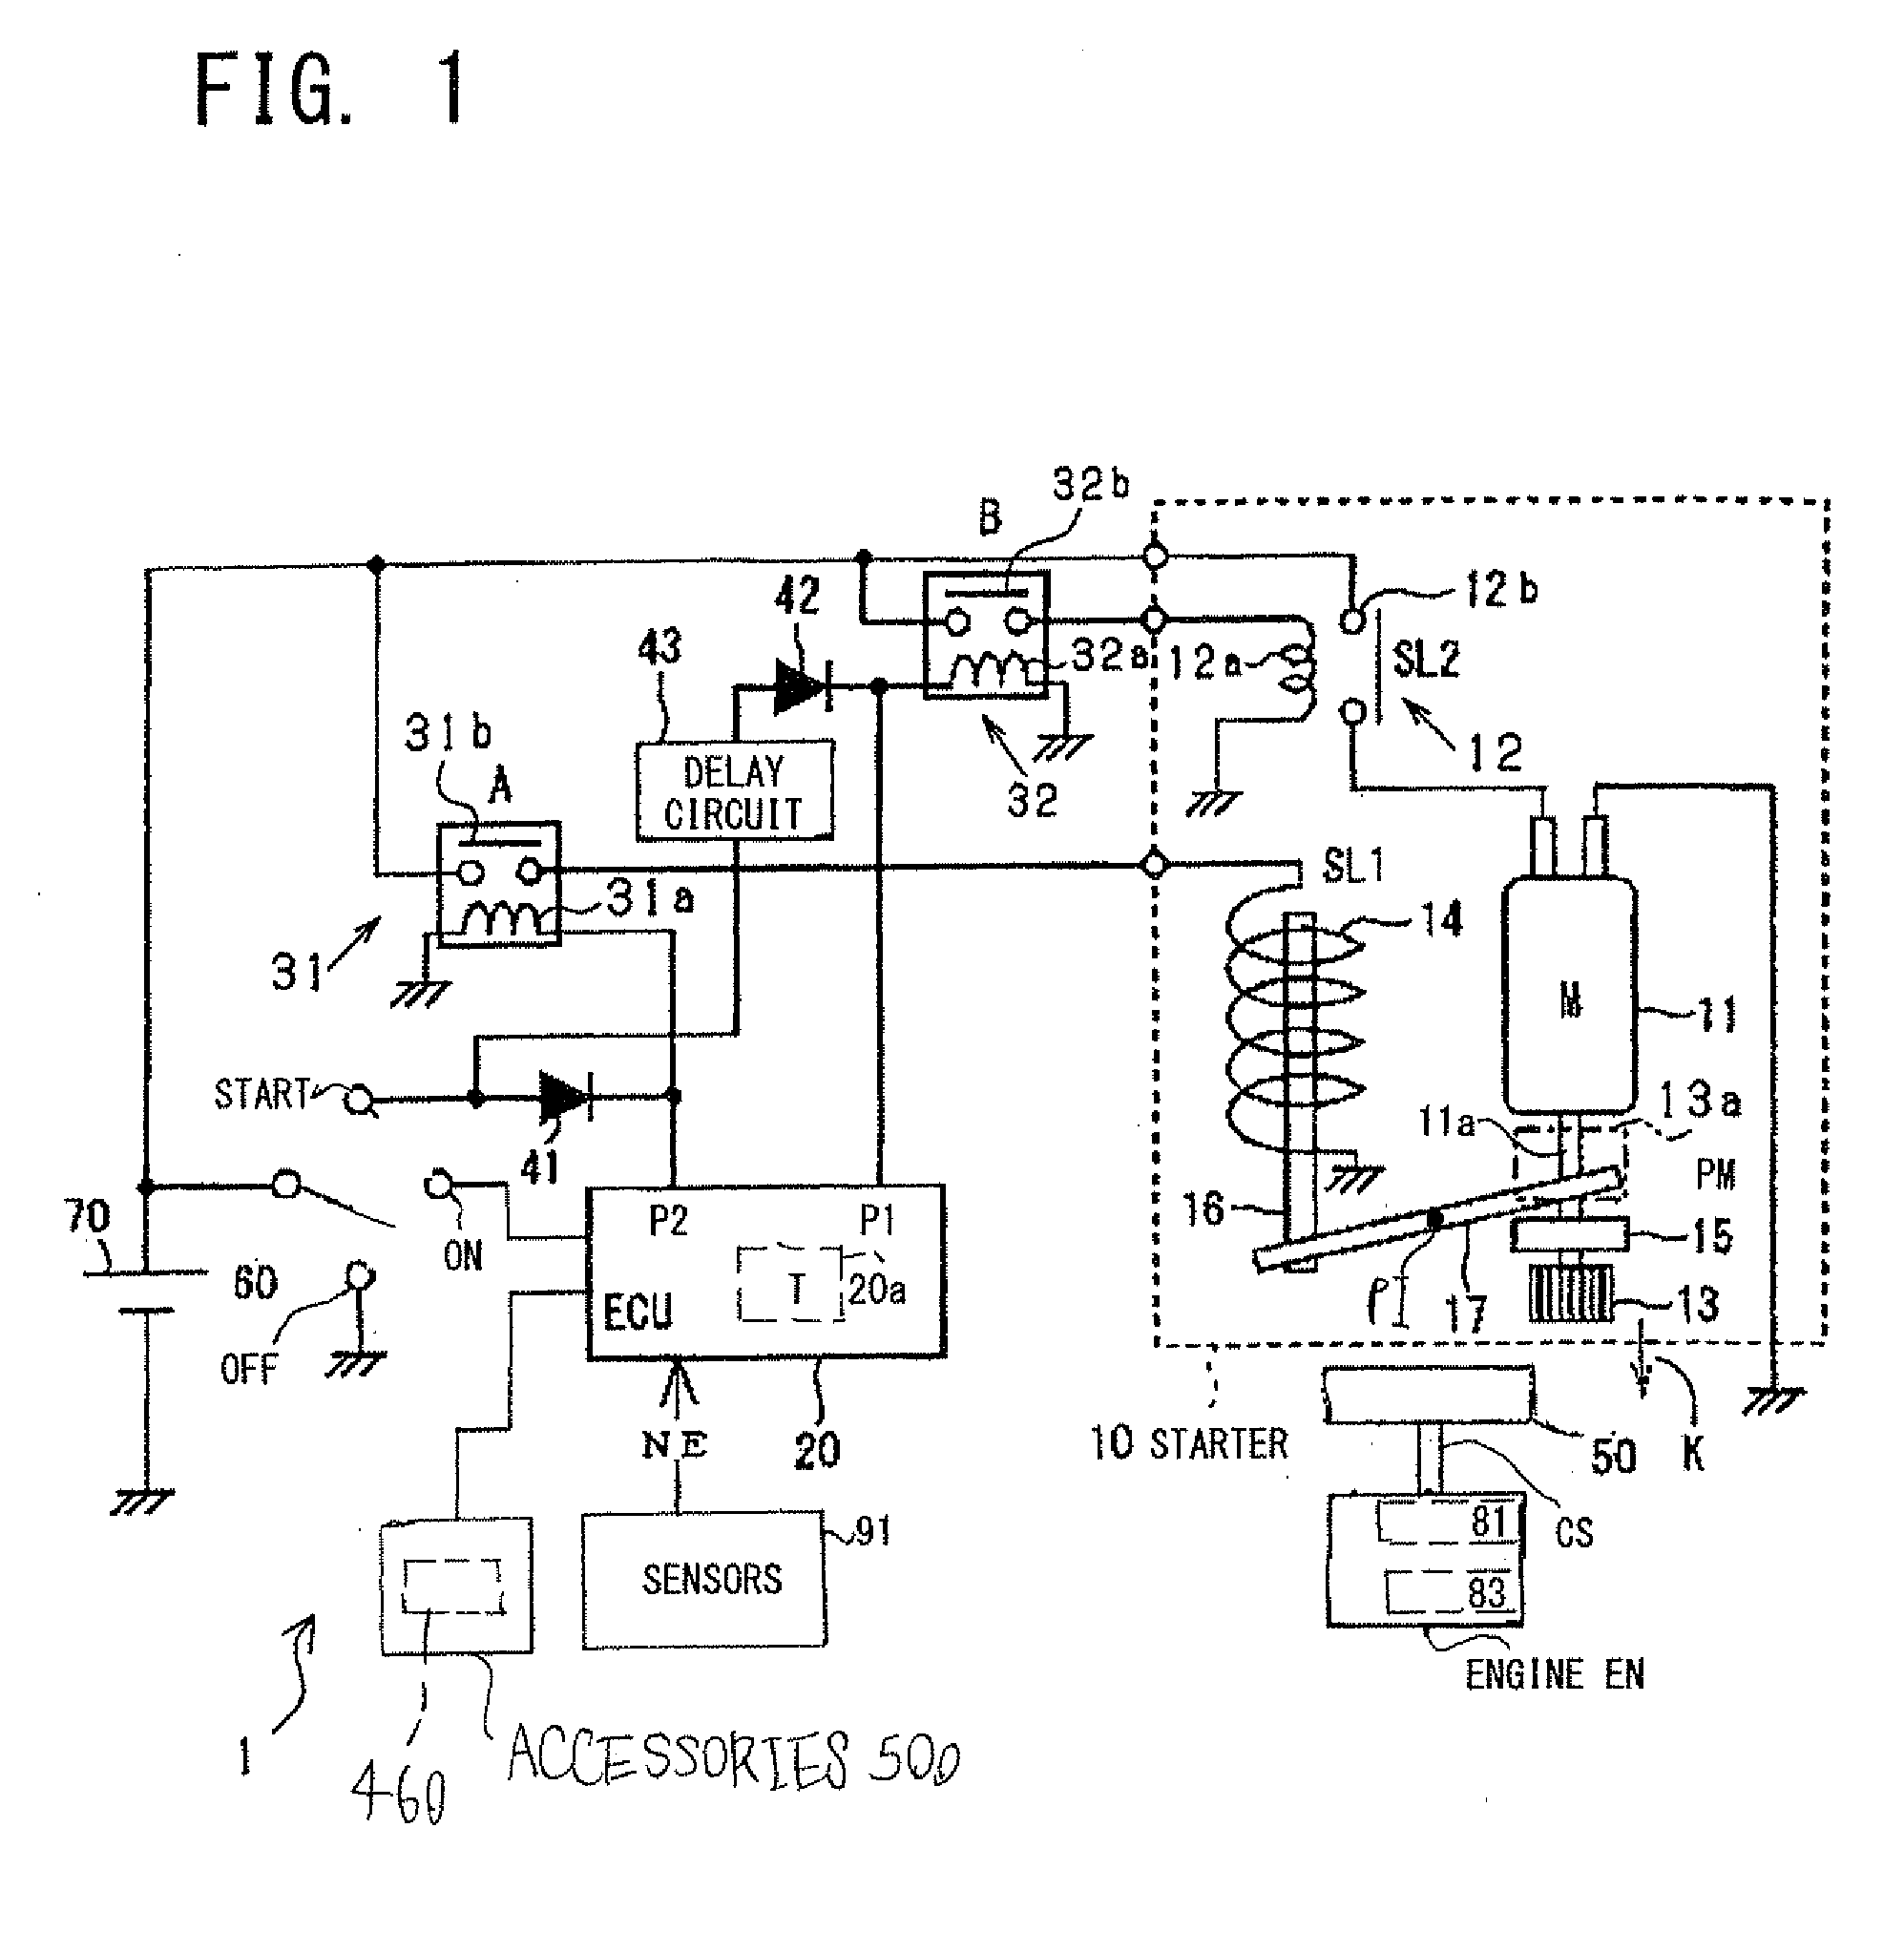 System for controlling starter for starting internal combustion engine